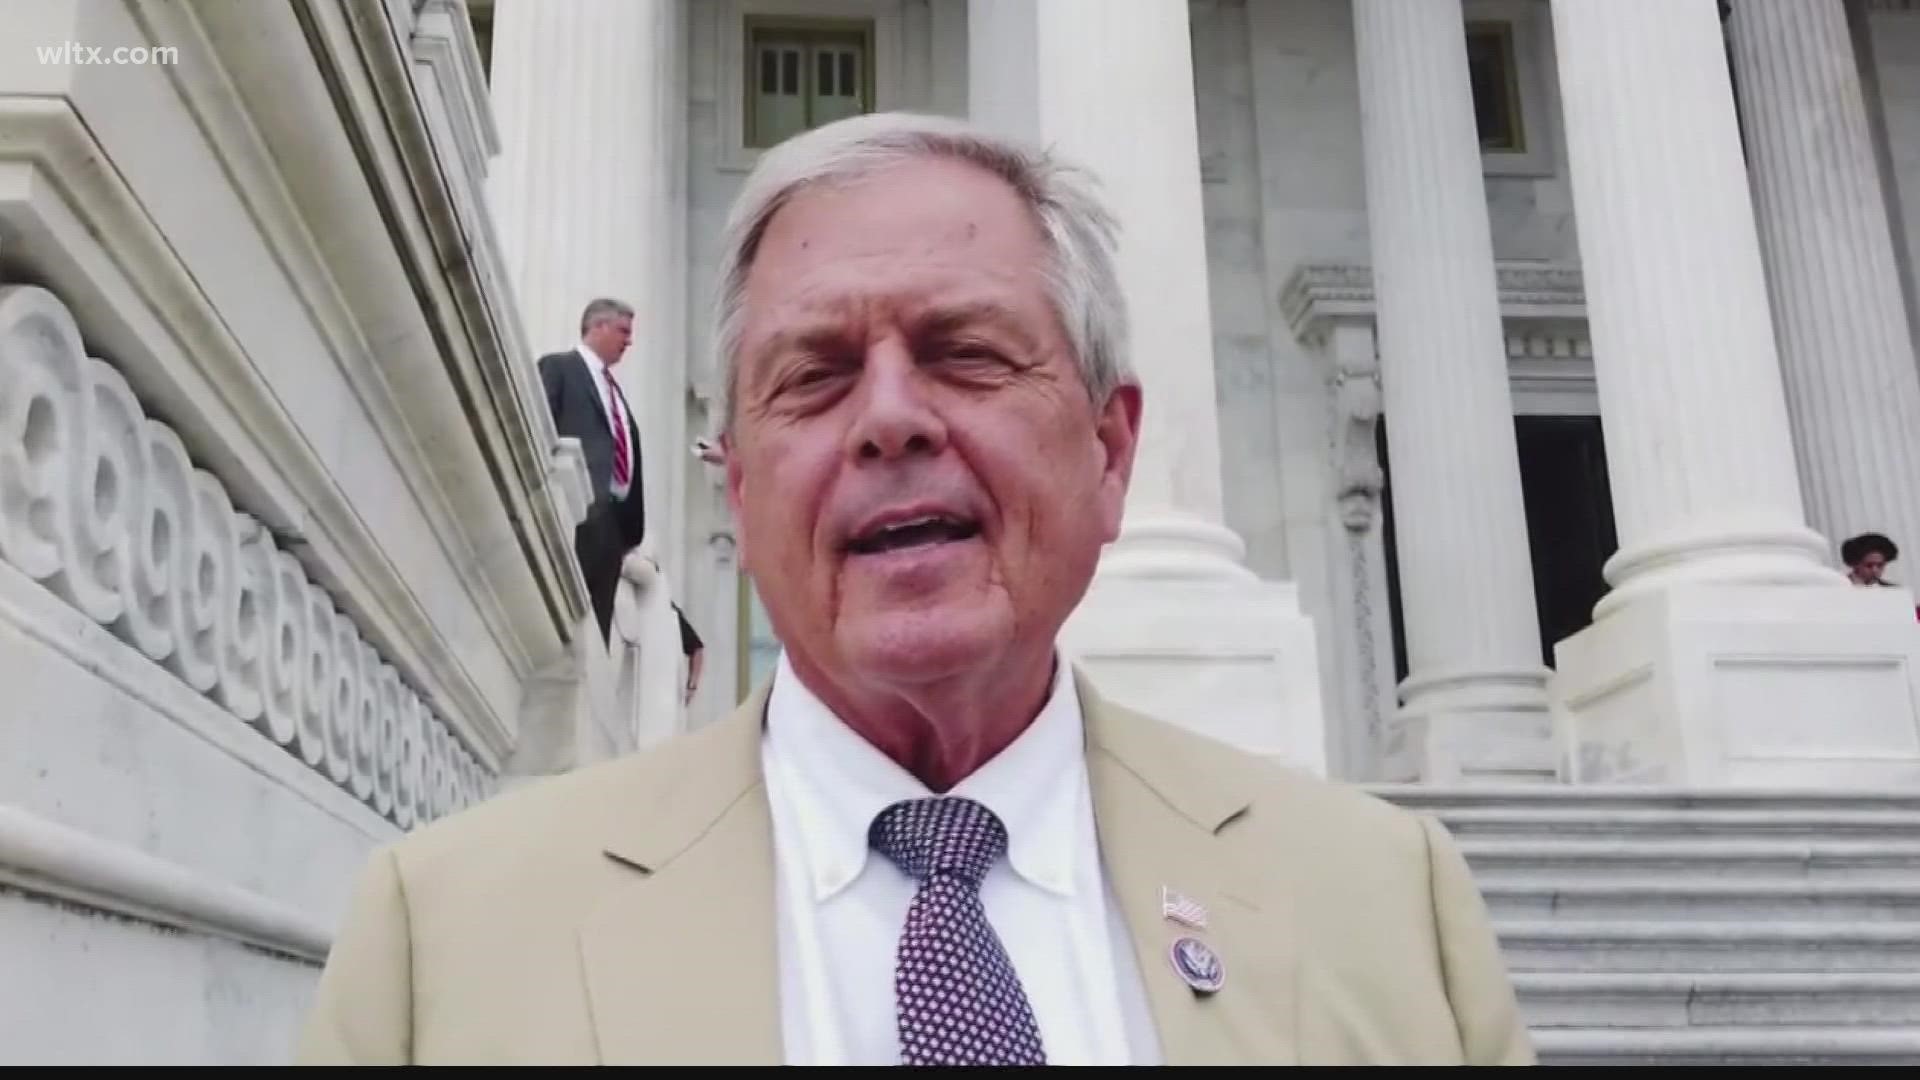 South Carolina U.S. Rep. Ralph Norman is responding to a report that he called for martial law over the results of the 2020 election.